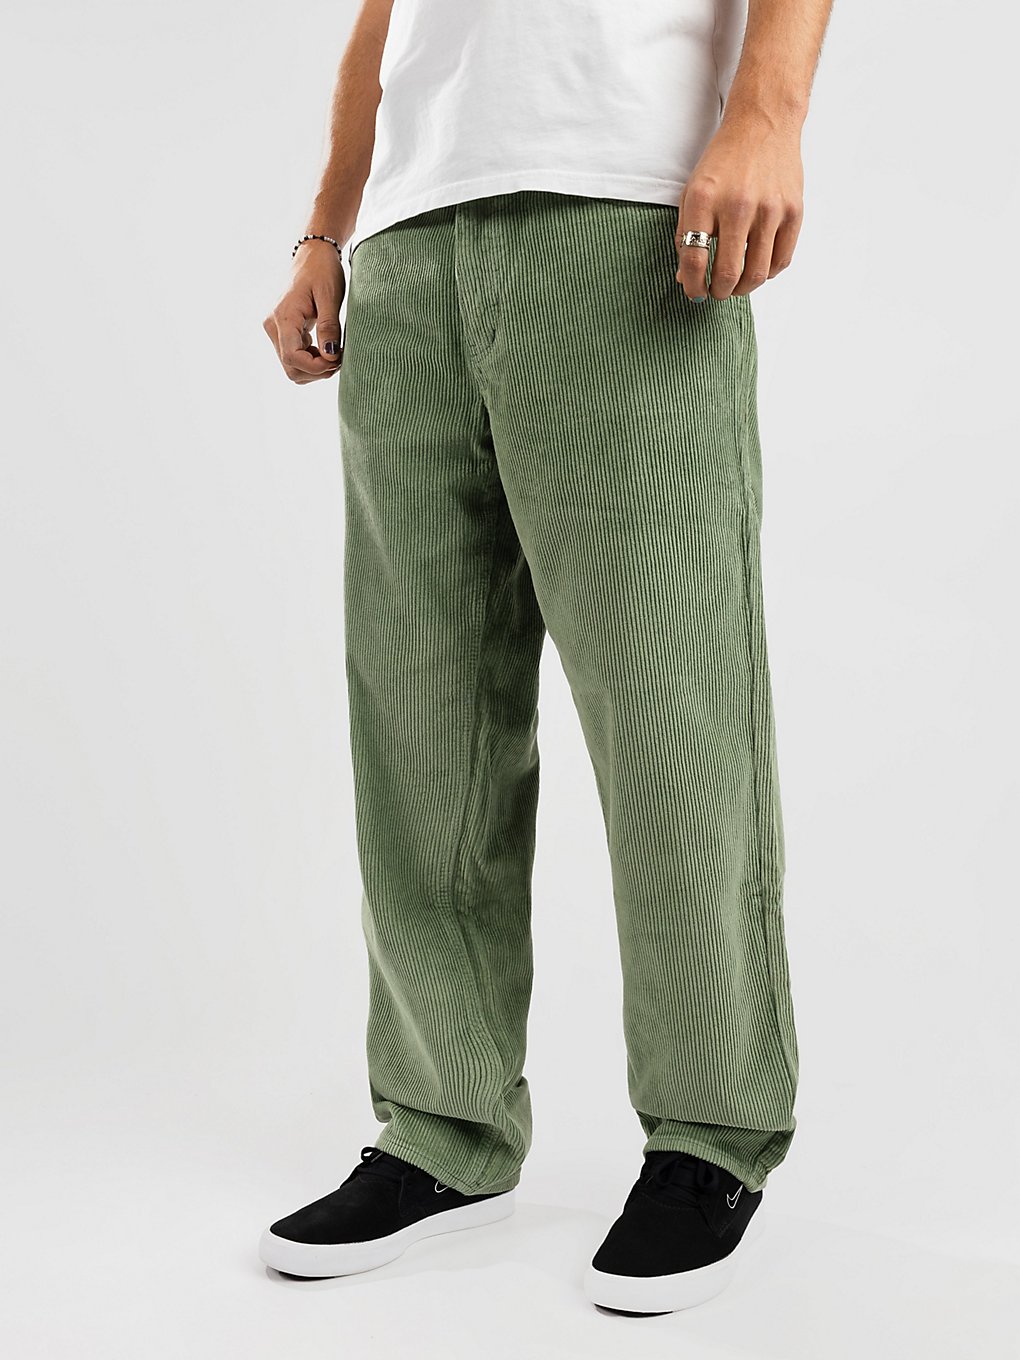 Empyre Loose Fit Sk8 Cordhose hedge green kaufen